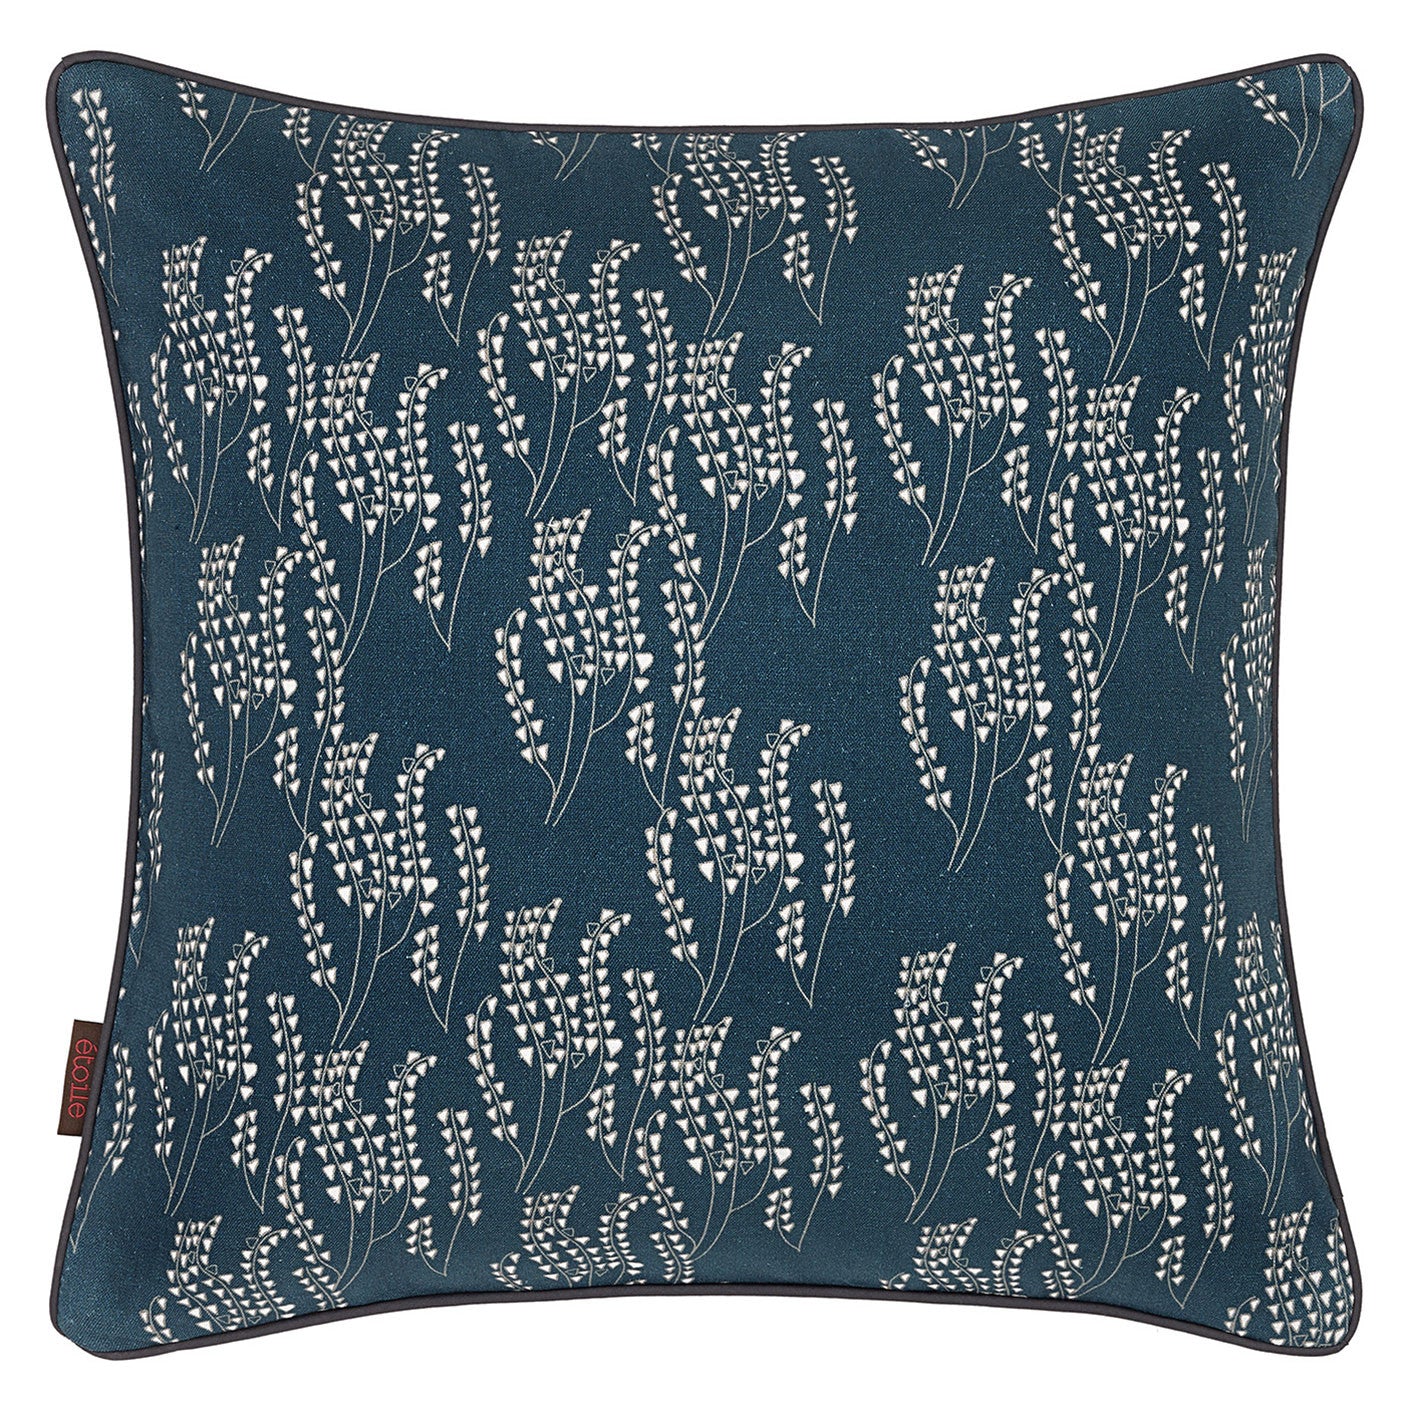 Maricopa Graphic Grass Pattern Linen Throw Pillow in Dark Petrol Blue 45x45cm 18x18" Cushion ships from Canada worldwide including the USA